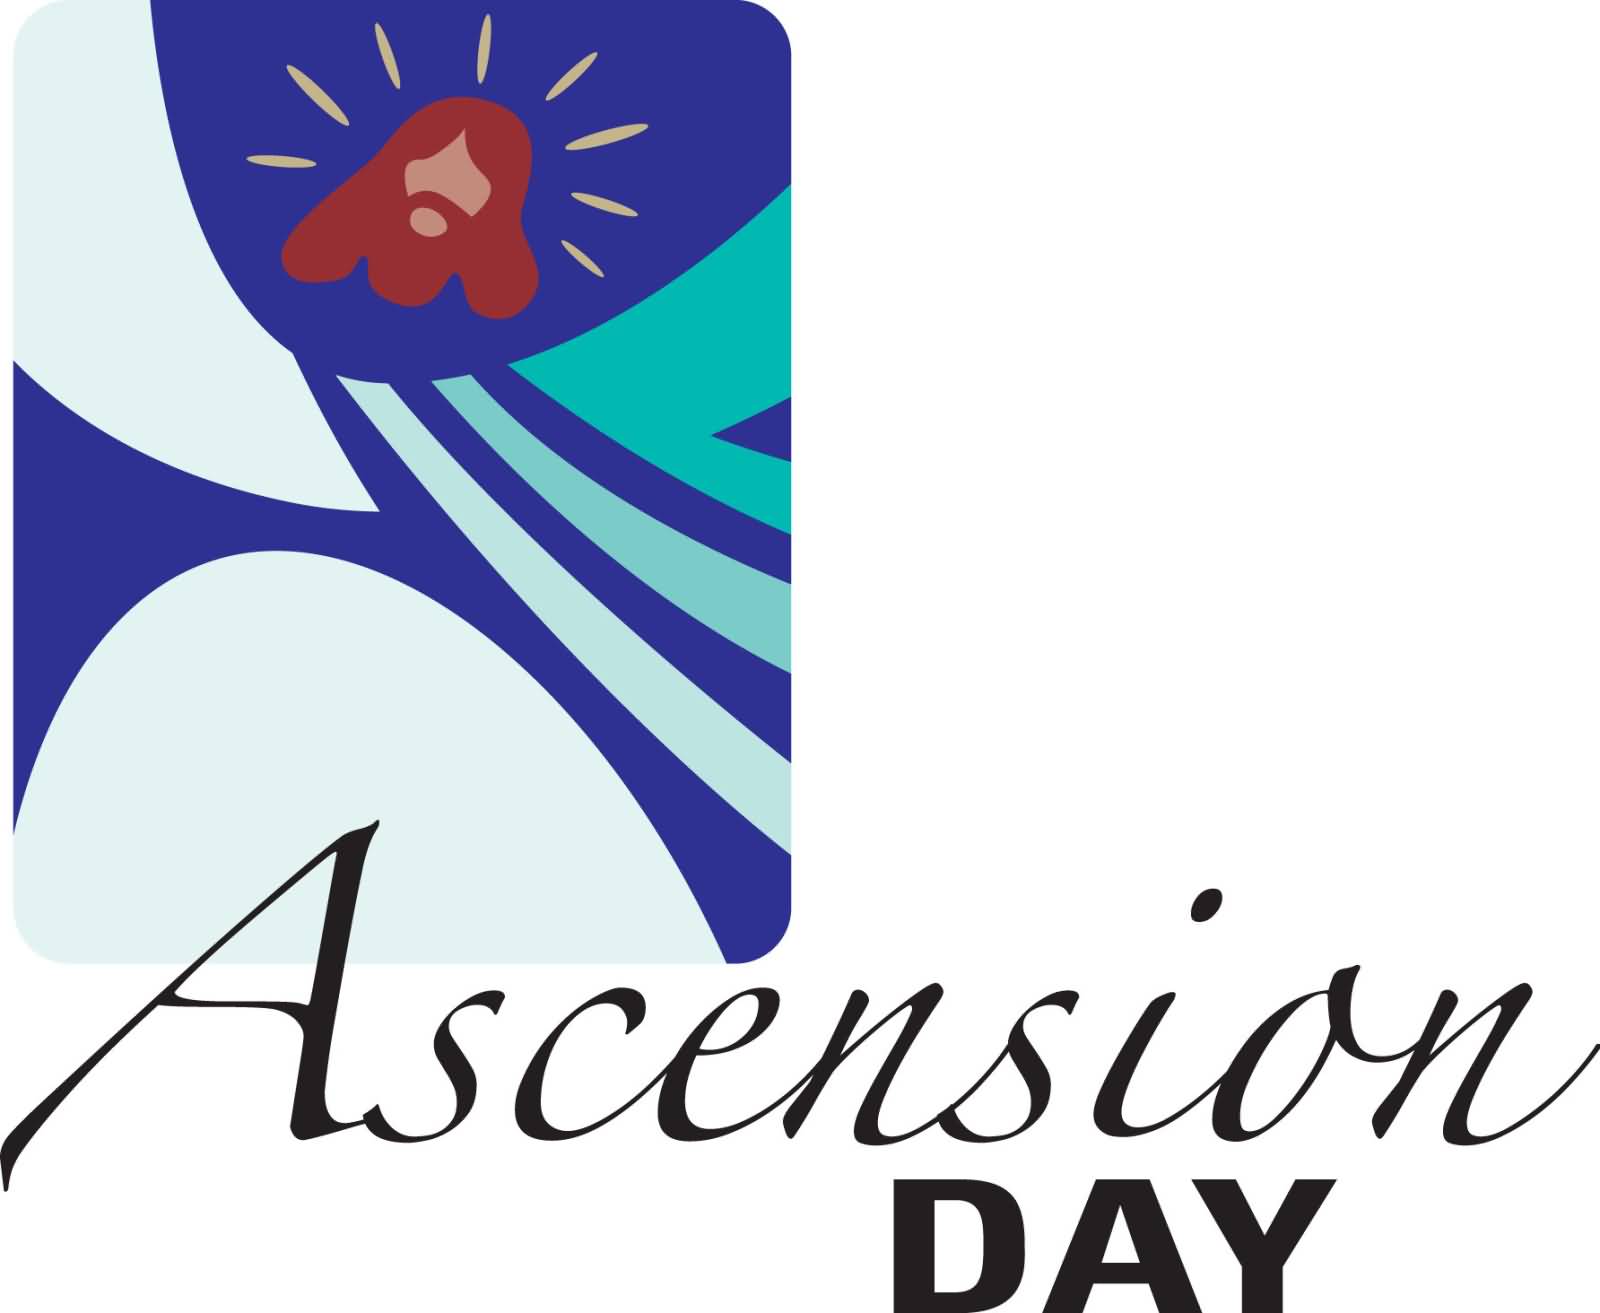 Ascension Day Clipart